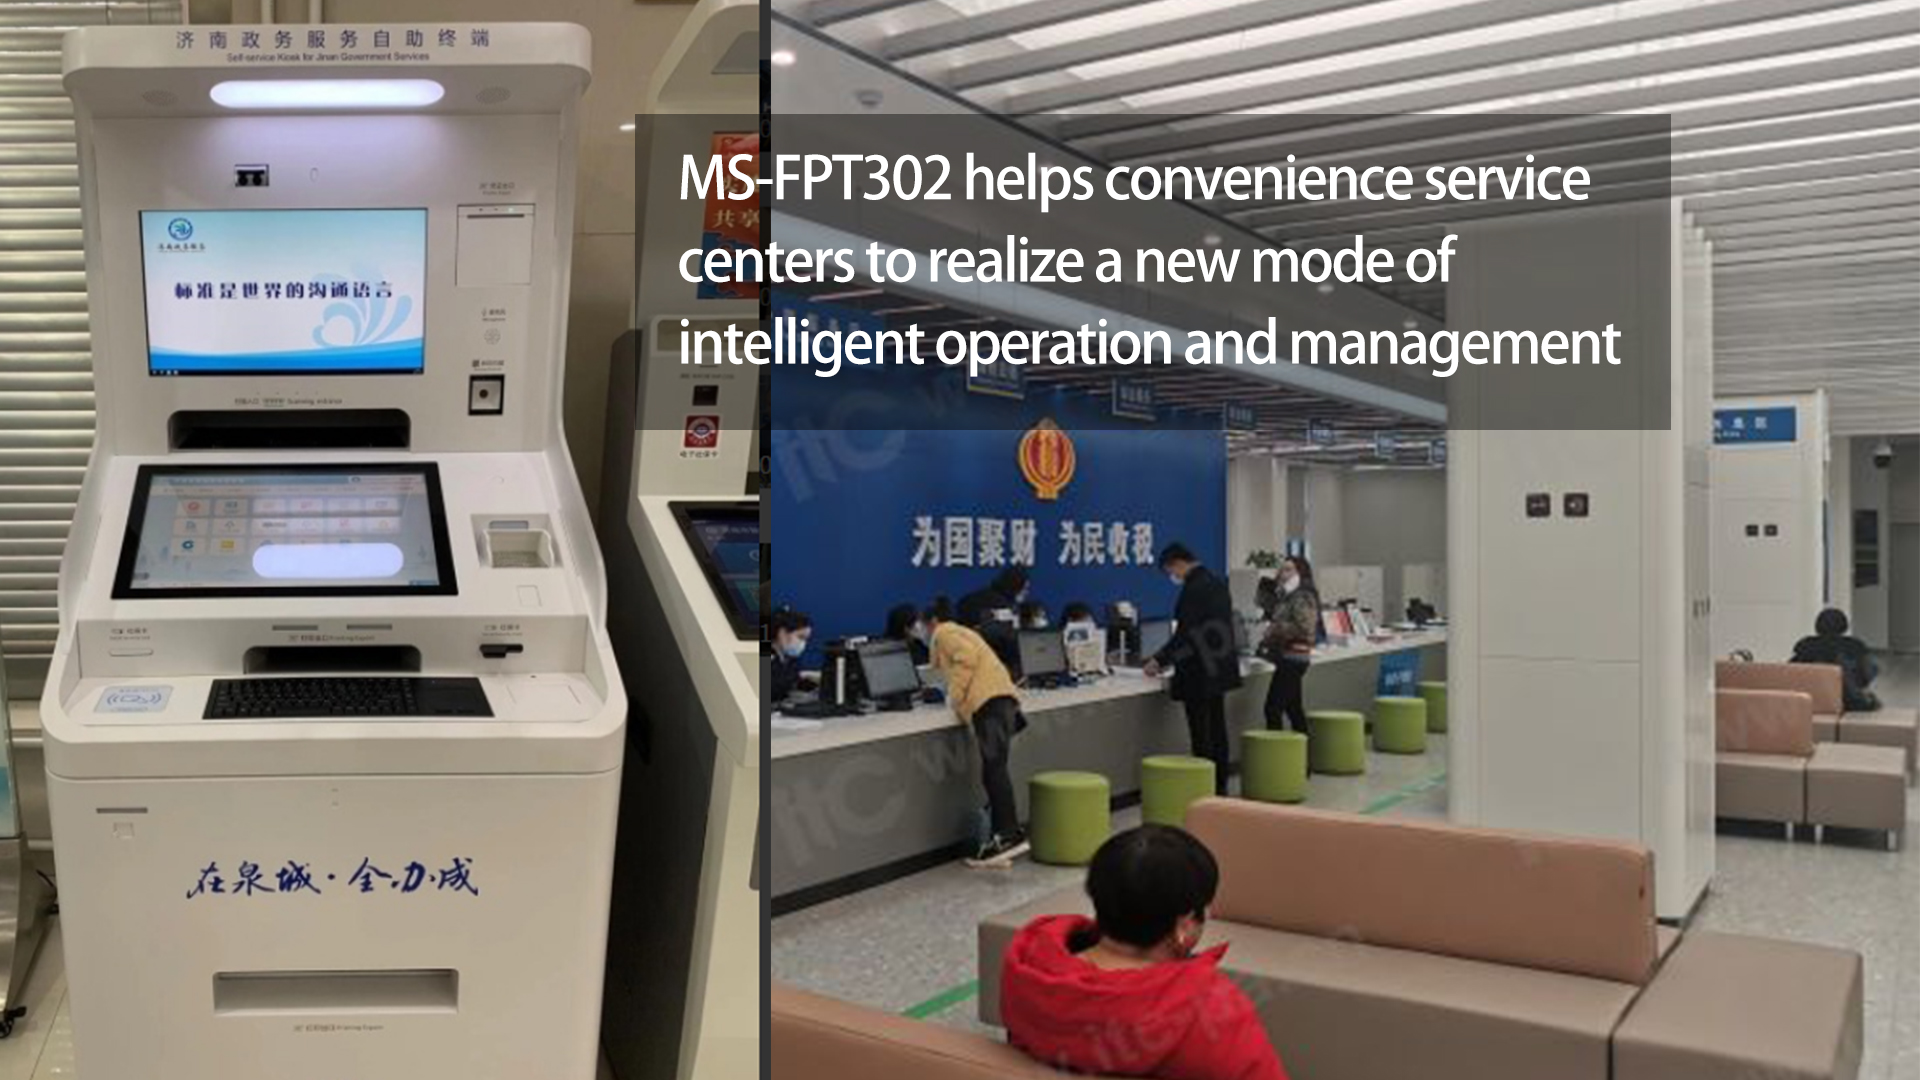 MS-FPT302 helps convenience service centers to realize a new mode of intelligent operation and management